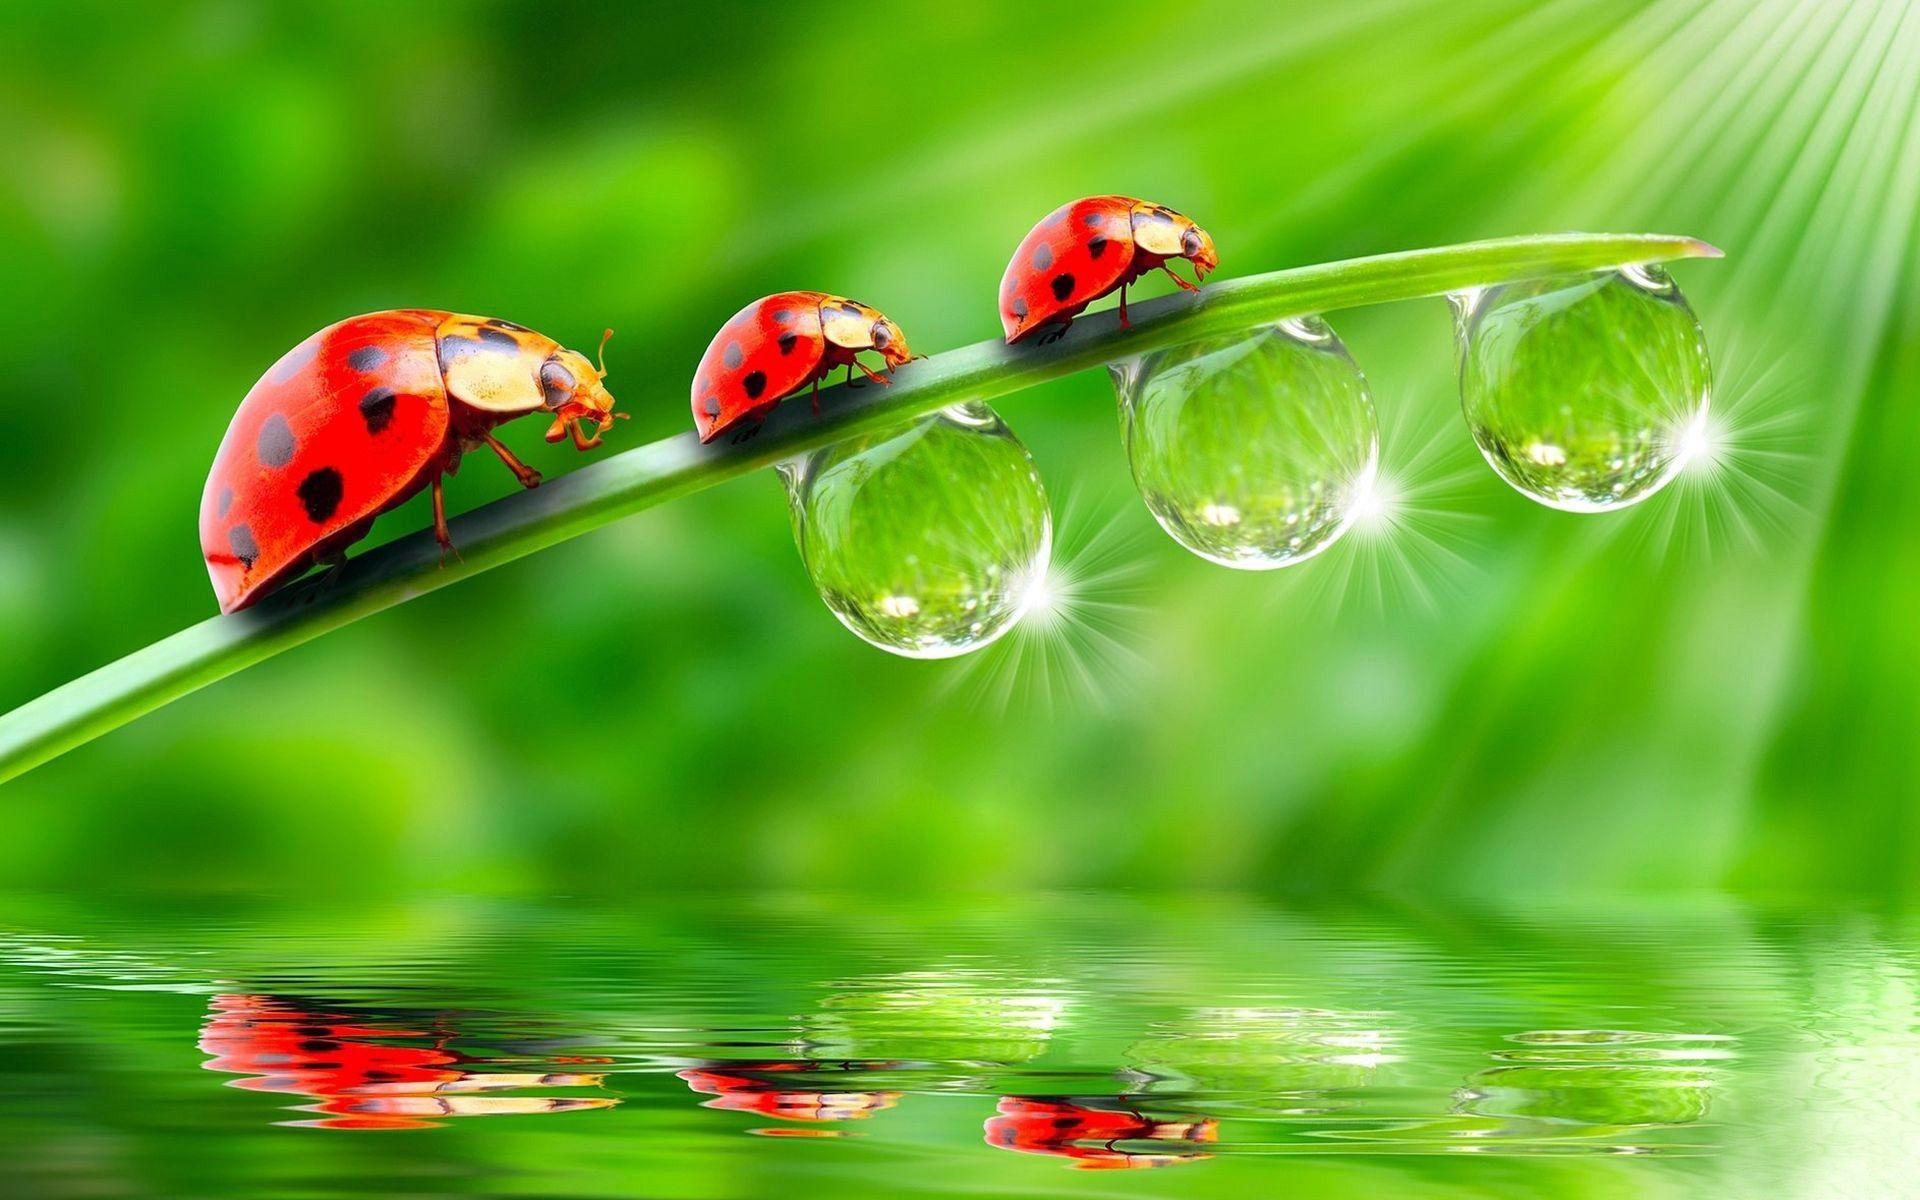 Water Drops HD Wallpaper. Water Drops Image and Picture. Cool